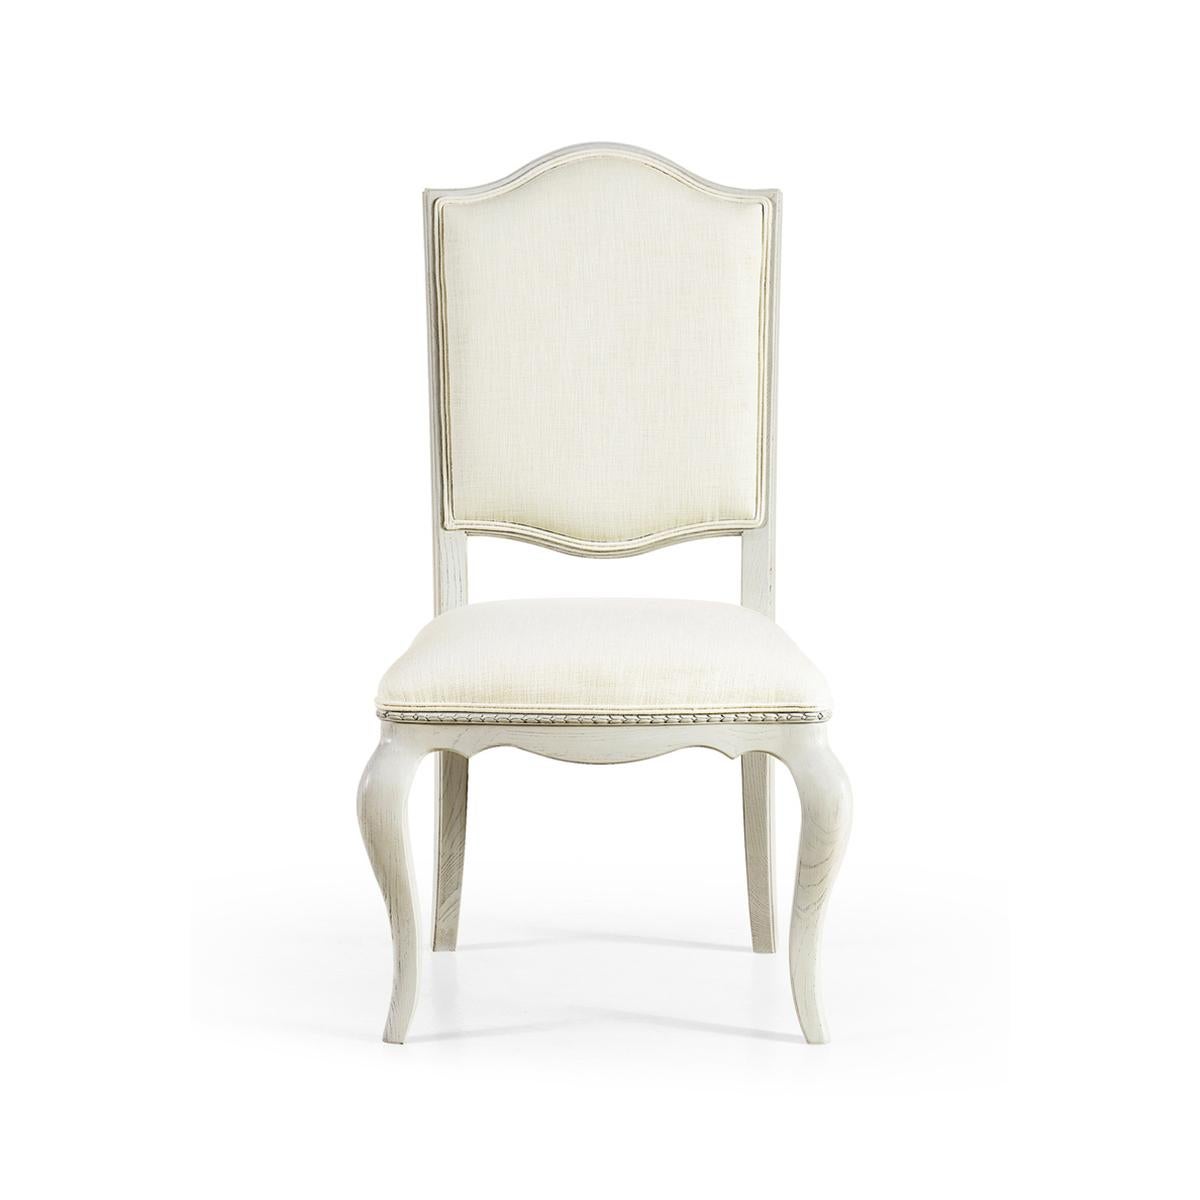 French painted dining chair, Louis XV style painted dining chair, this dining side chair is raised on gently sloped sabre legs with a curved floating back and a bellflower detail. A painted light gray finish and Belgian performance linen provide